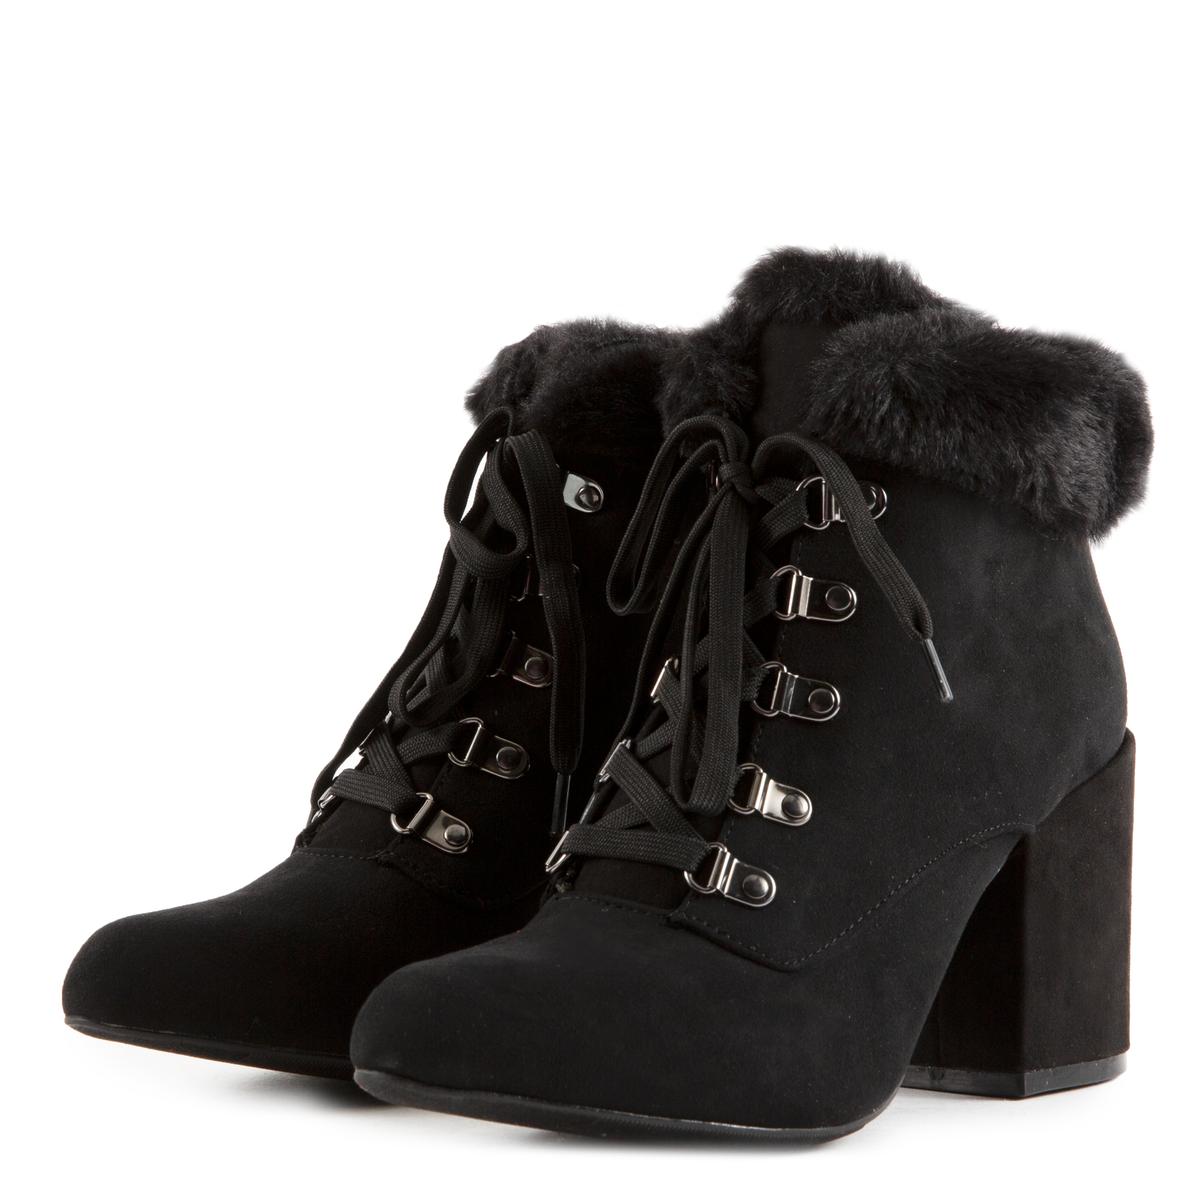 Vitality-19 Lace-Up Fur Booties